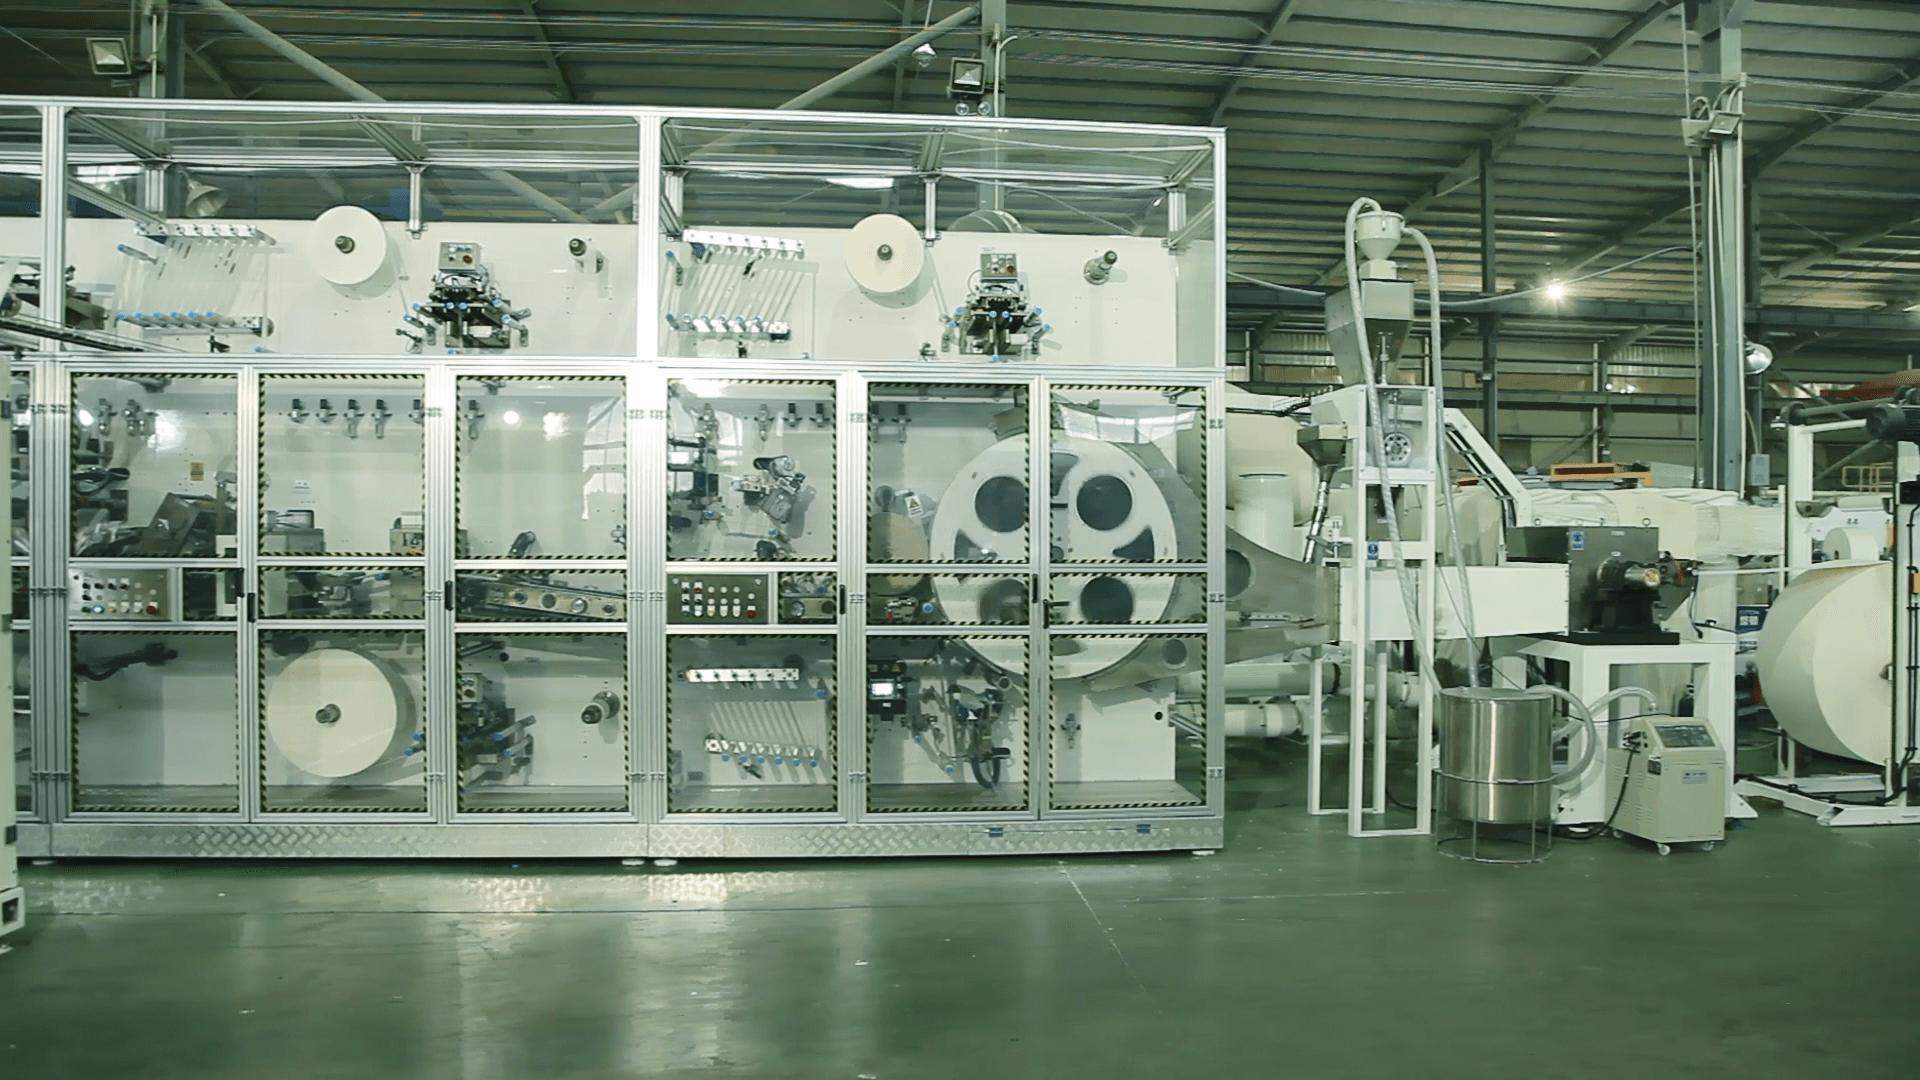 Nappy manufacturing equipment